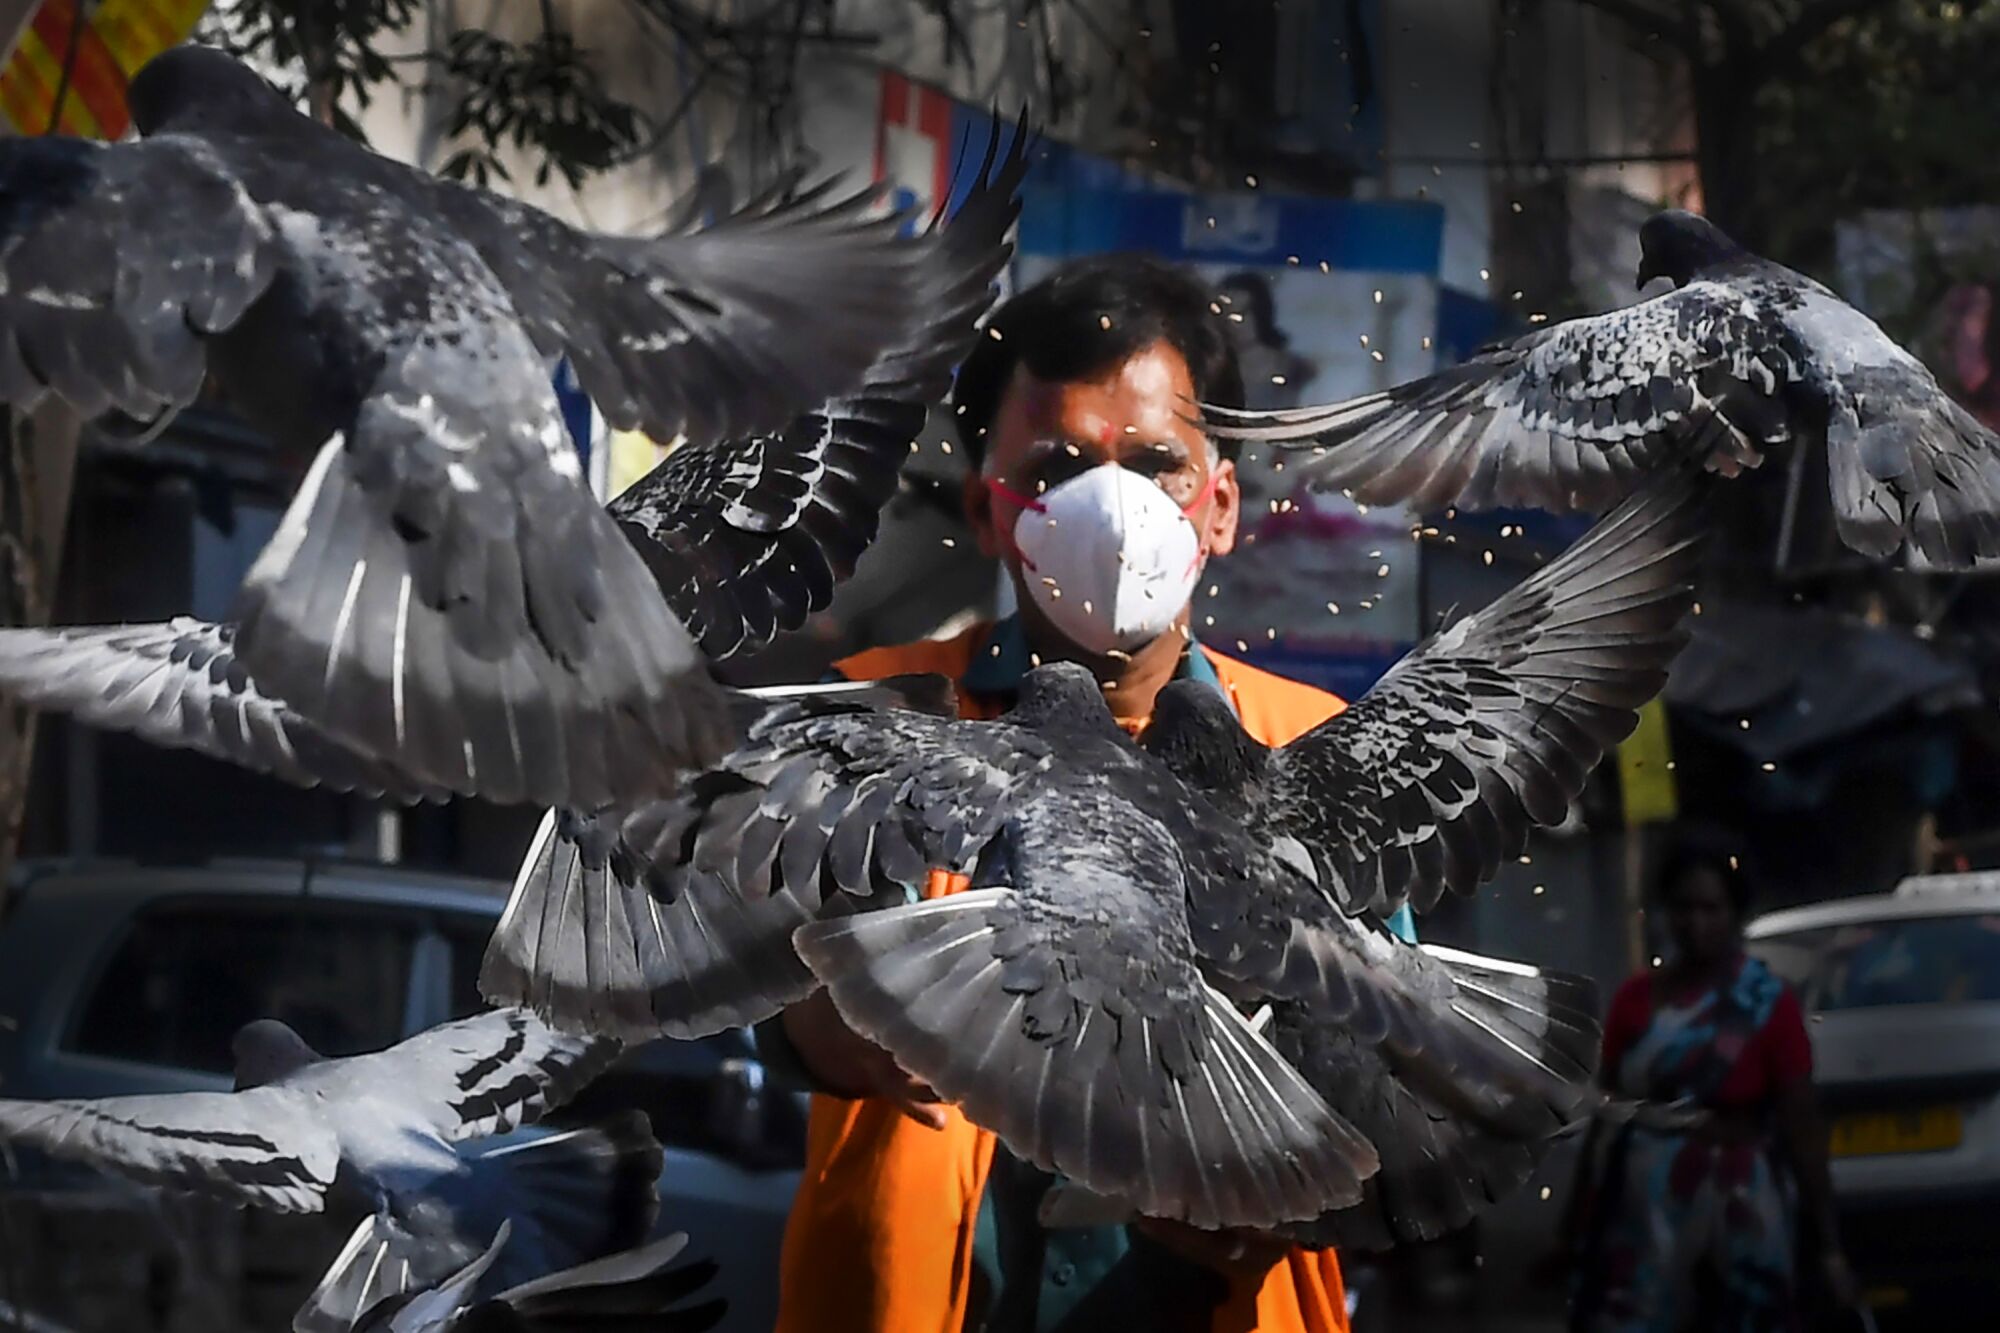 INDIA: A man wearing a facemask feeds pigeons on a empty street during a 21-day government-imposed nationwide lockdown as a preventive measure against the COVID-19 coronavirus in Kolkata on March 26, 2020.